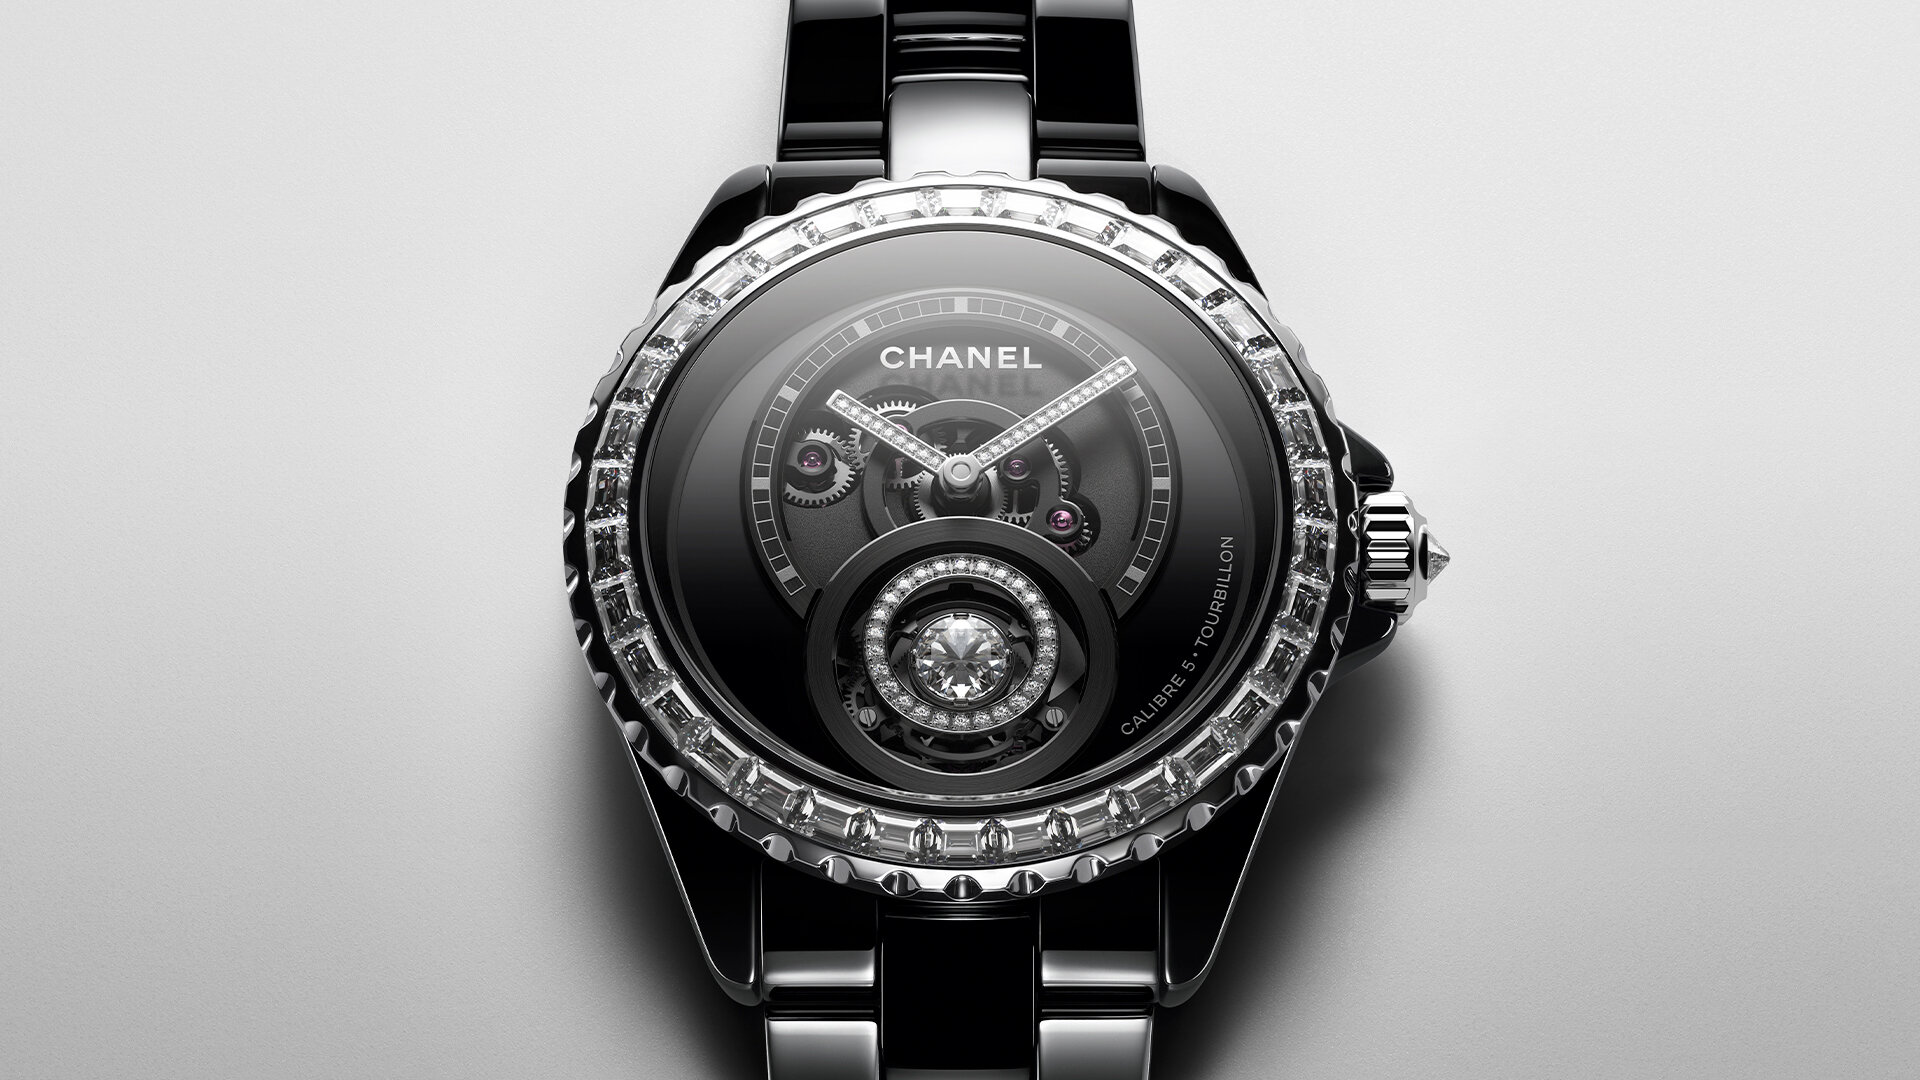 Chanels latest high jewellery watch releases for 2020